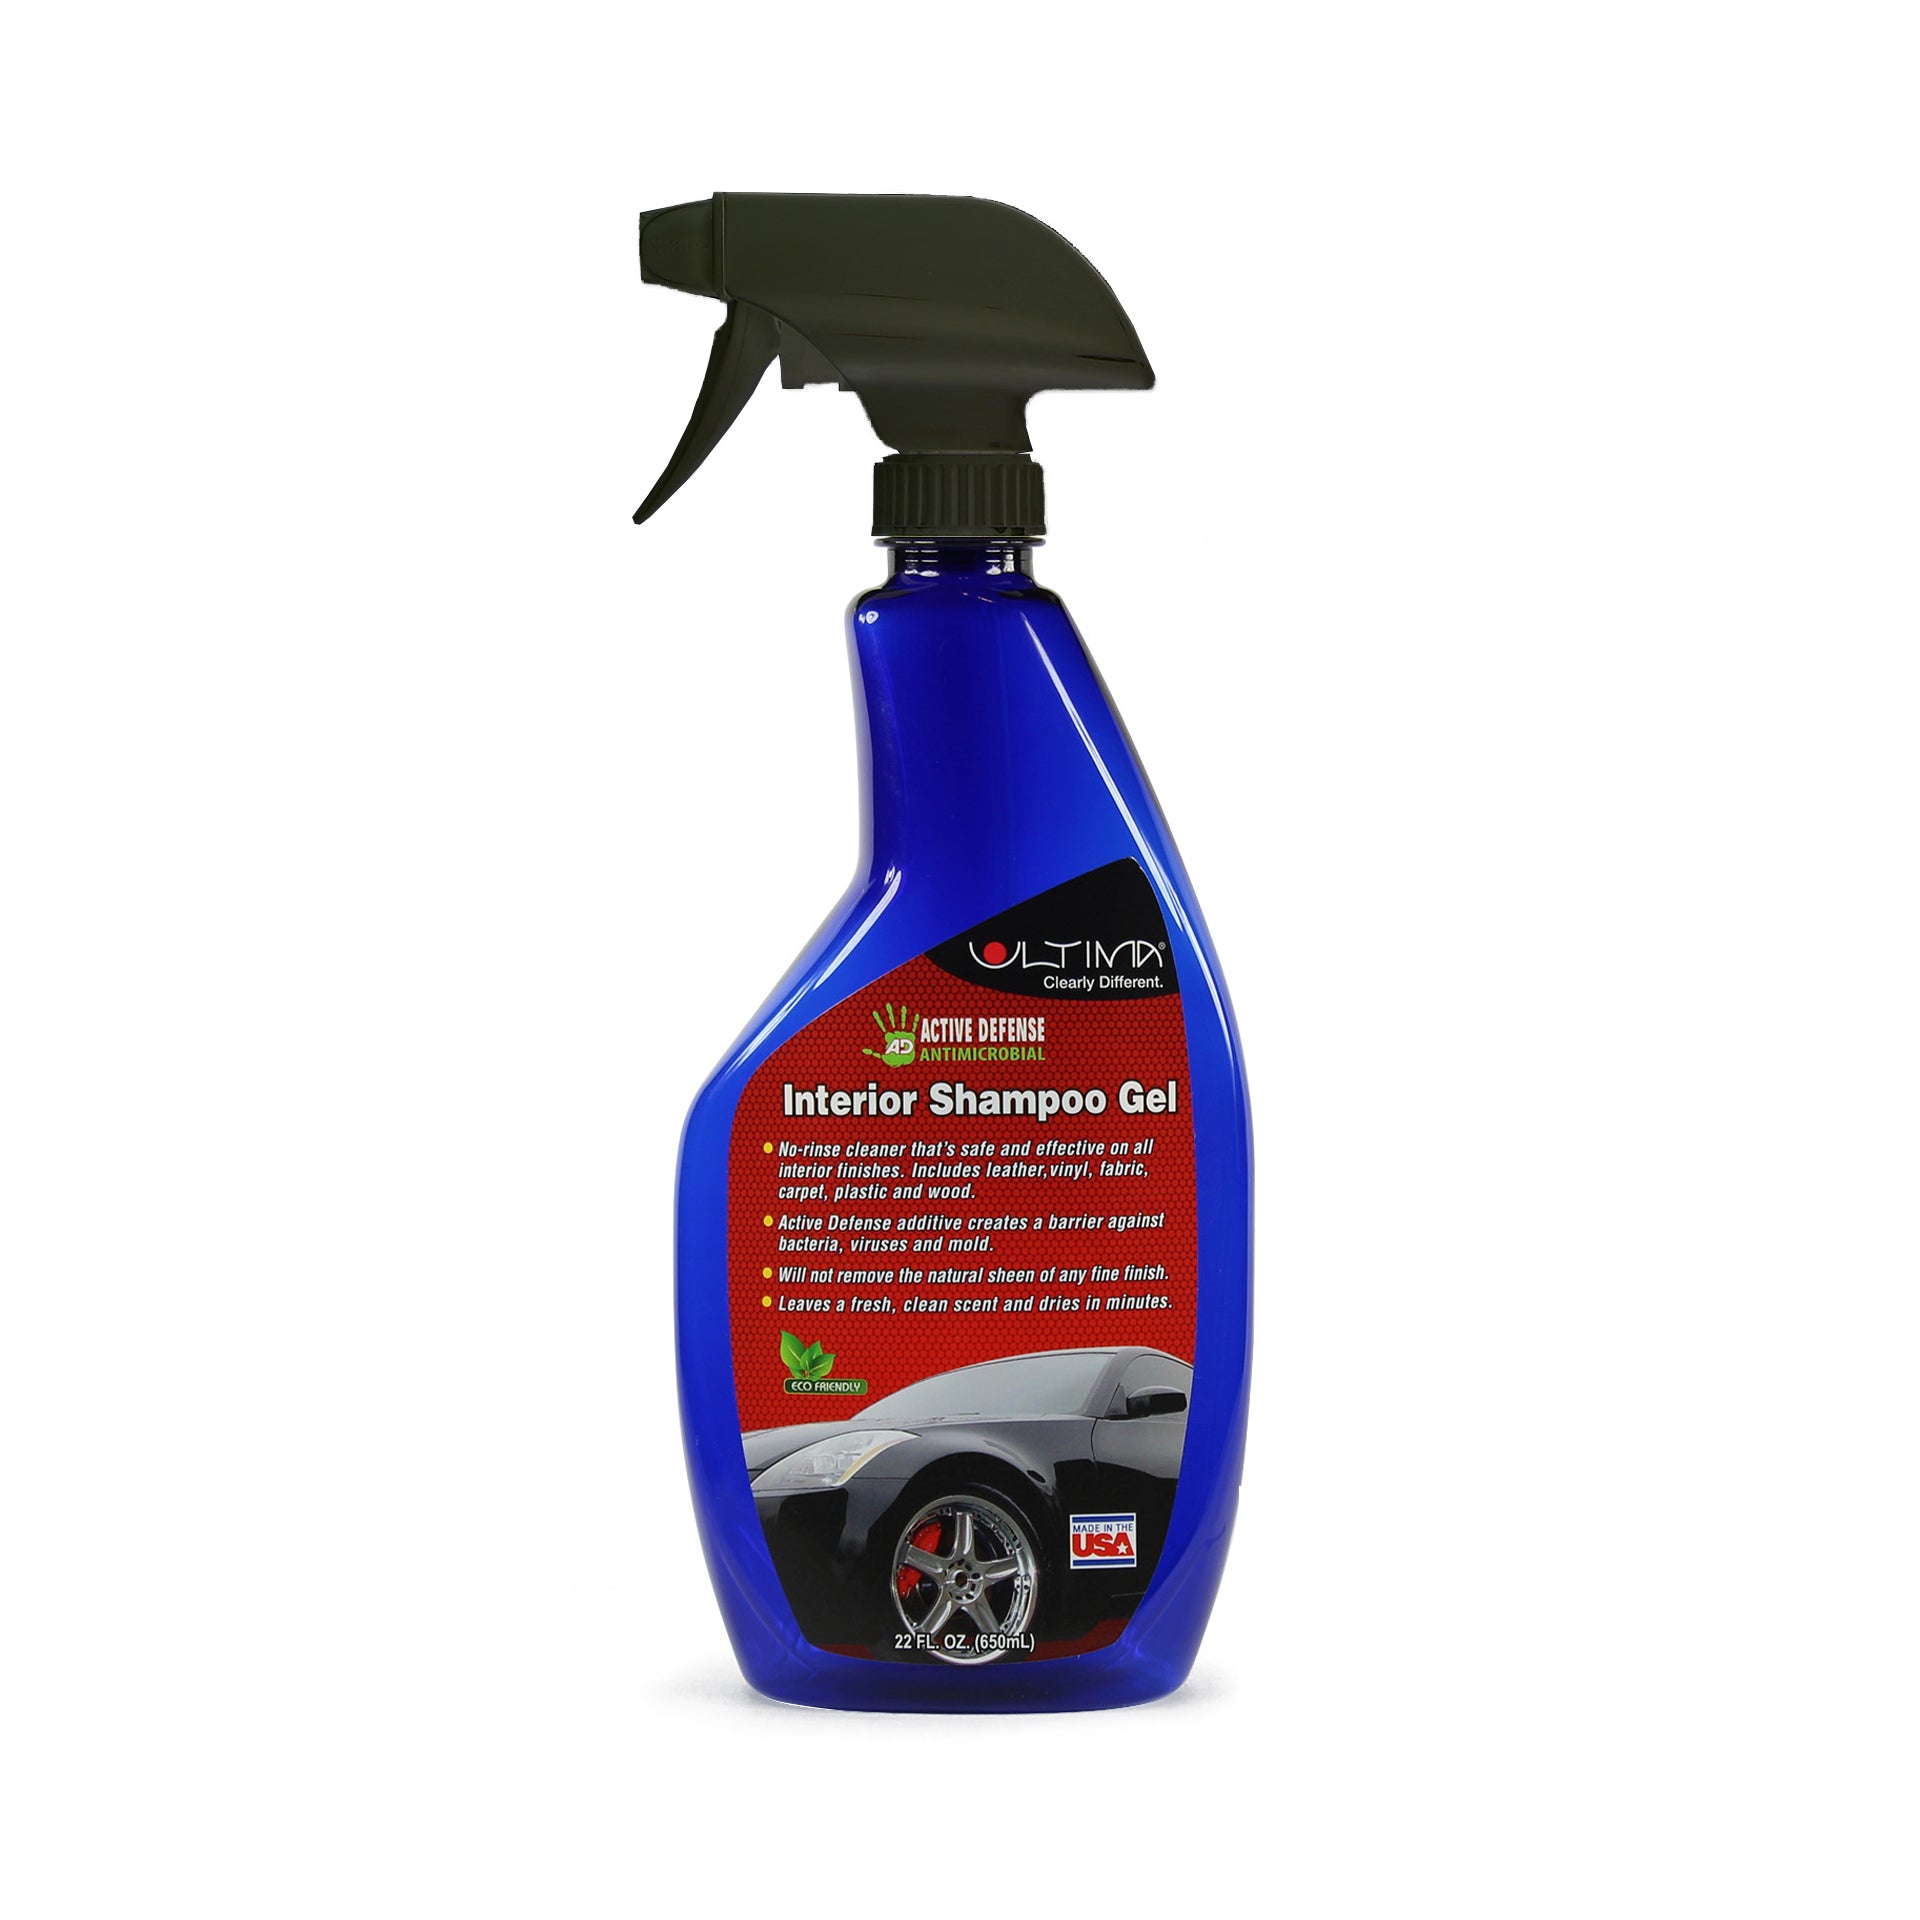 Turbo Wax Tire Dressing T2 and Tire Dressing Applicator Combo